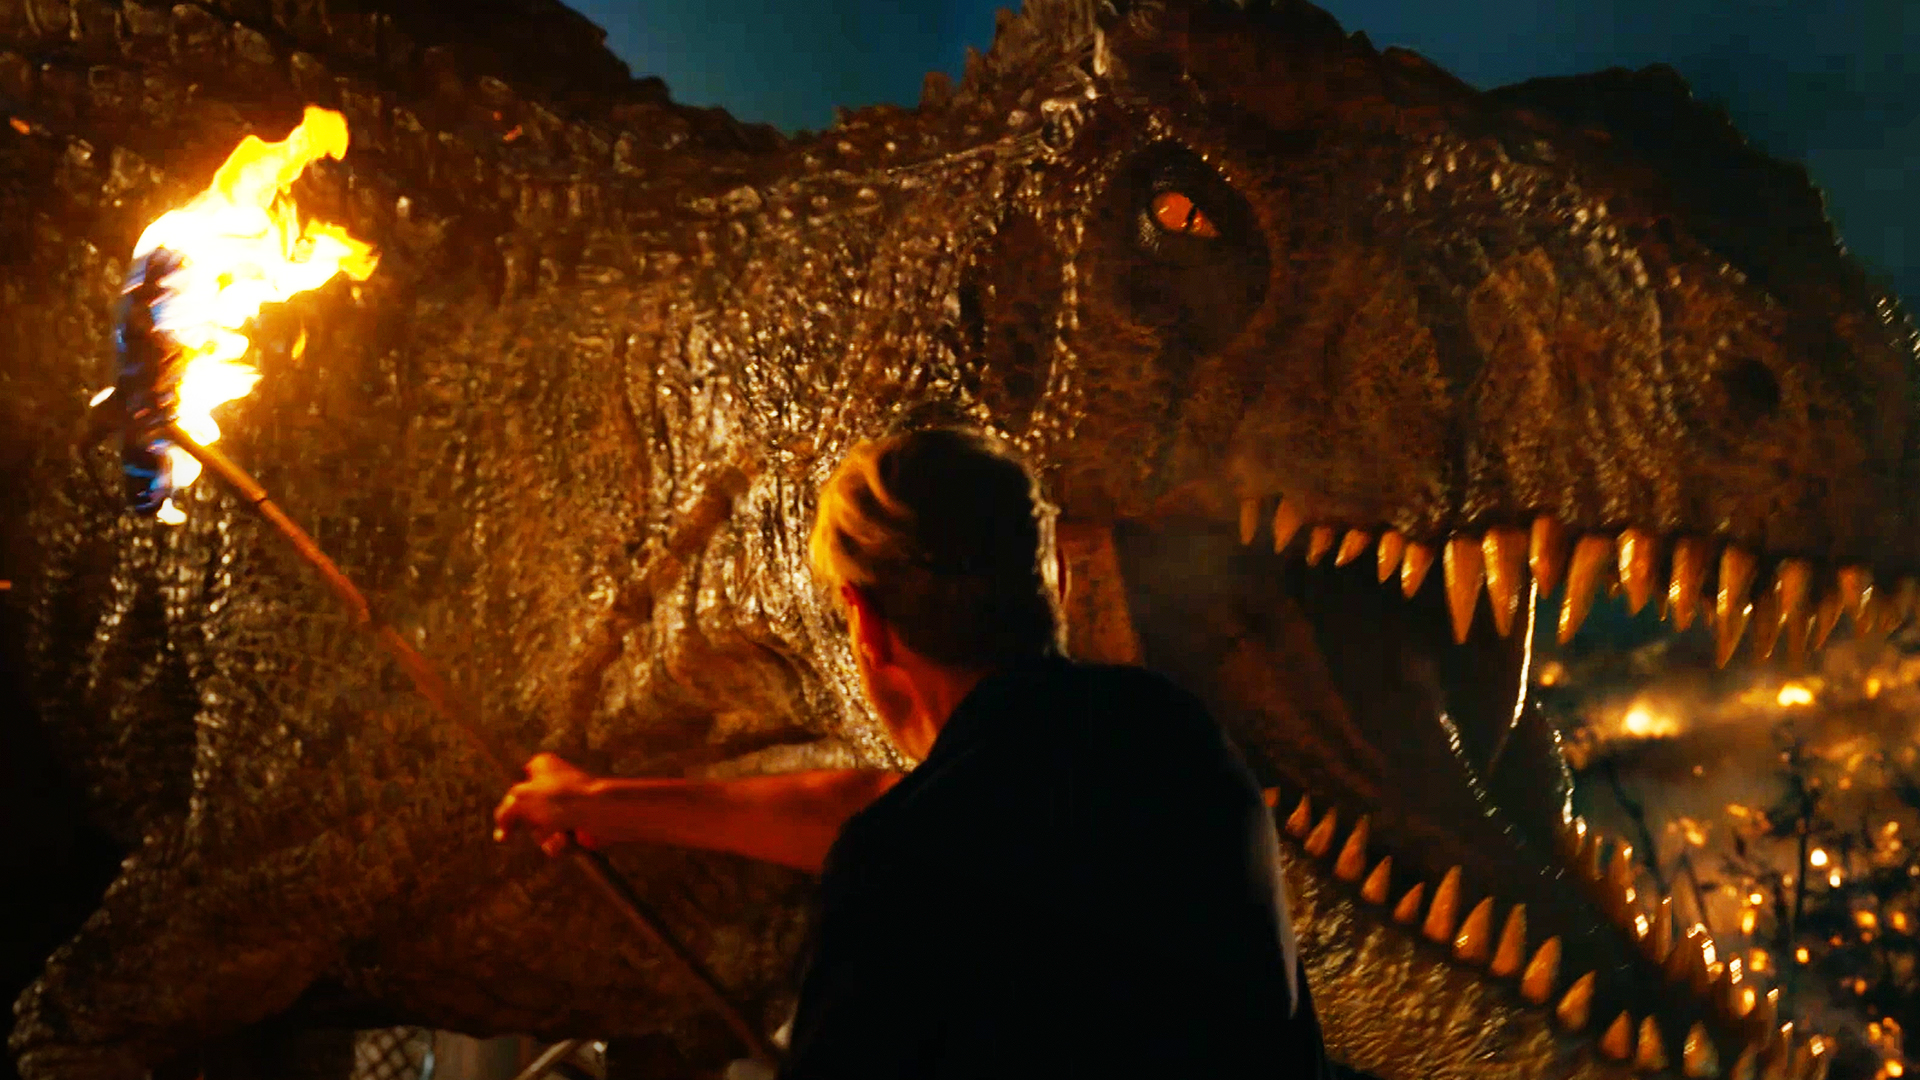 Jurassic Park 4 confirmed – and gets a new title, Jurassic World